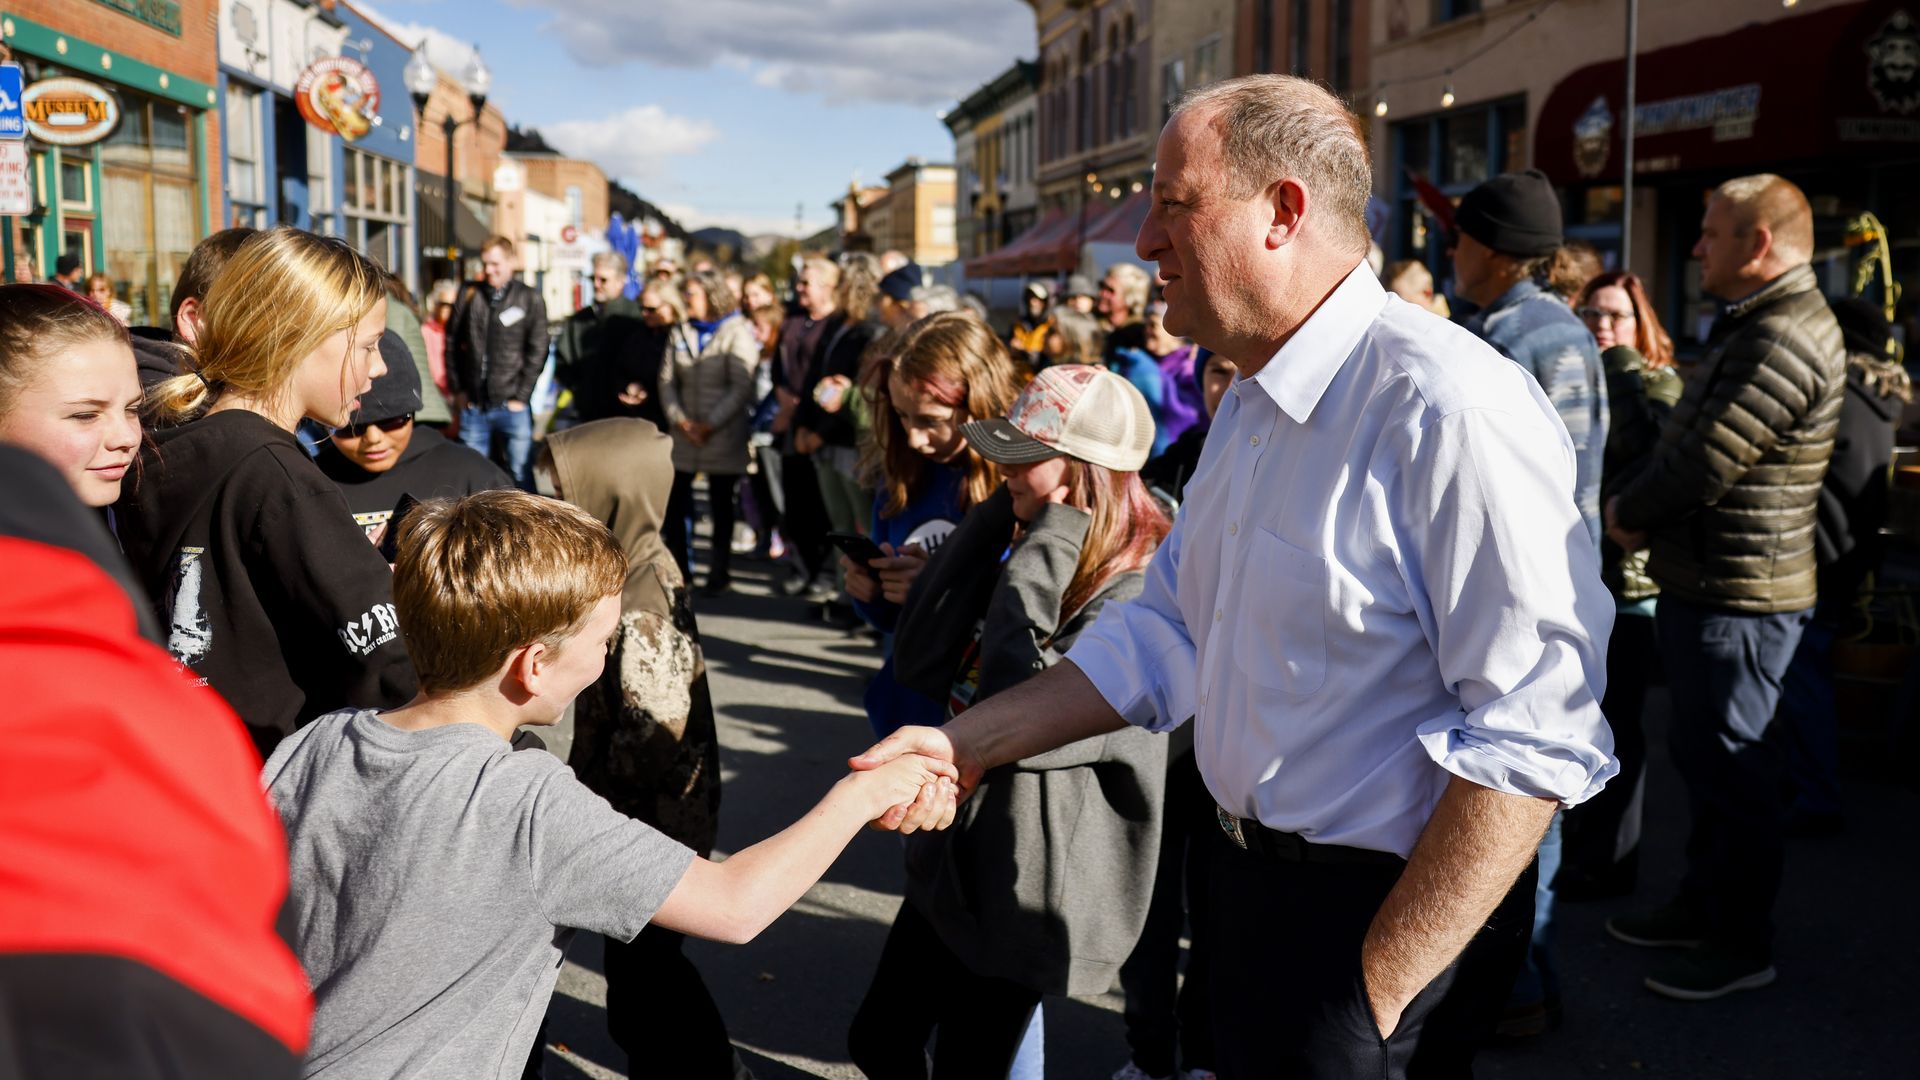 Gov. Jared Polis on the campaign trail Oct. 26 in Idaho Springs. Photo: Michael Ciaglo/Getty Images